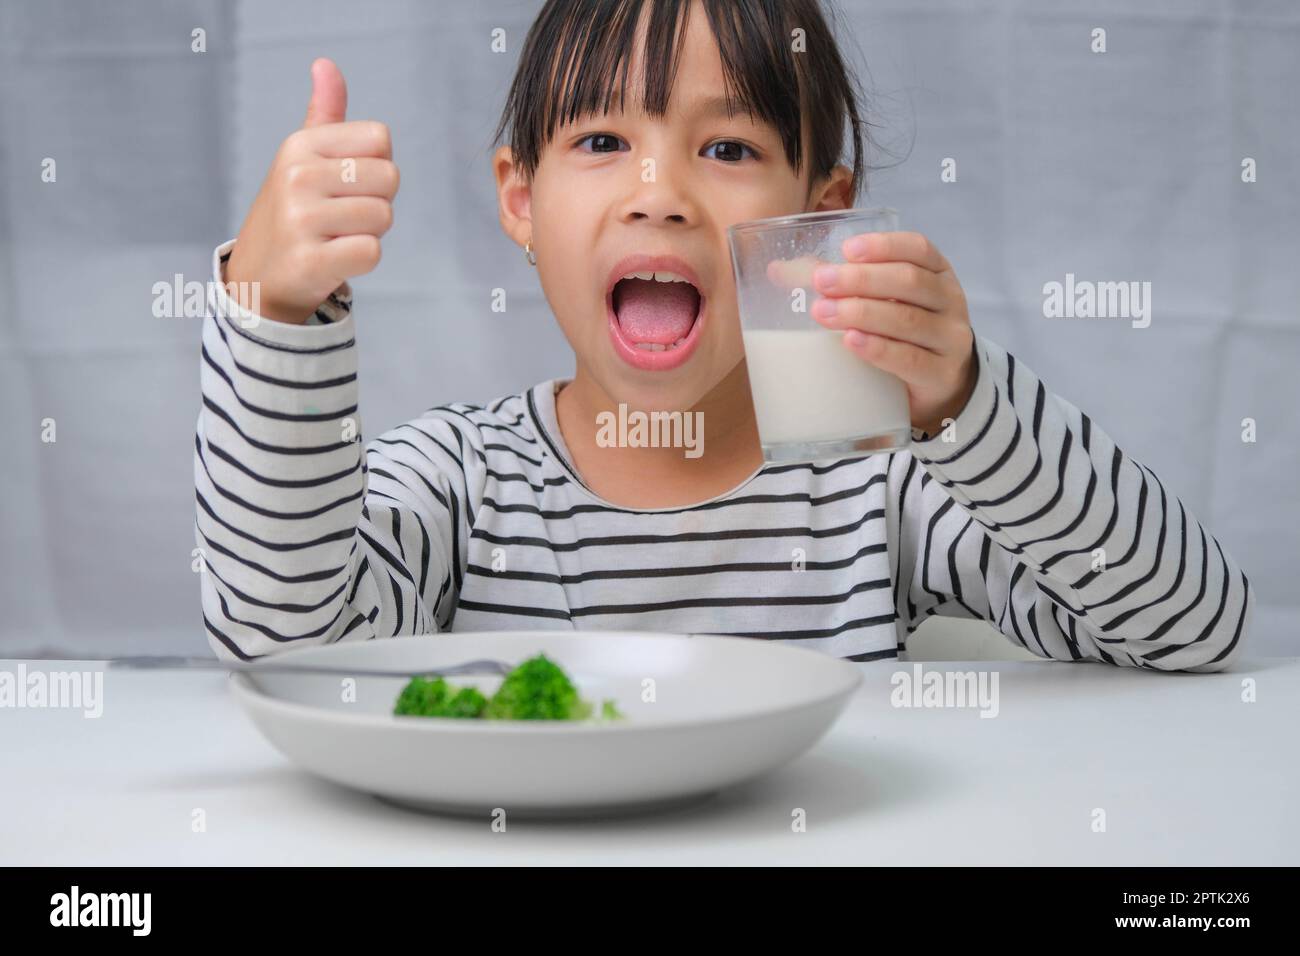 Cute Asian girl drinking a glass of milk in the morning before going to school. Little girl eats healthy vegetables and milk for her meals. Healthy fo Stock Photo